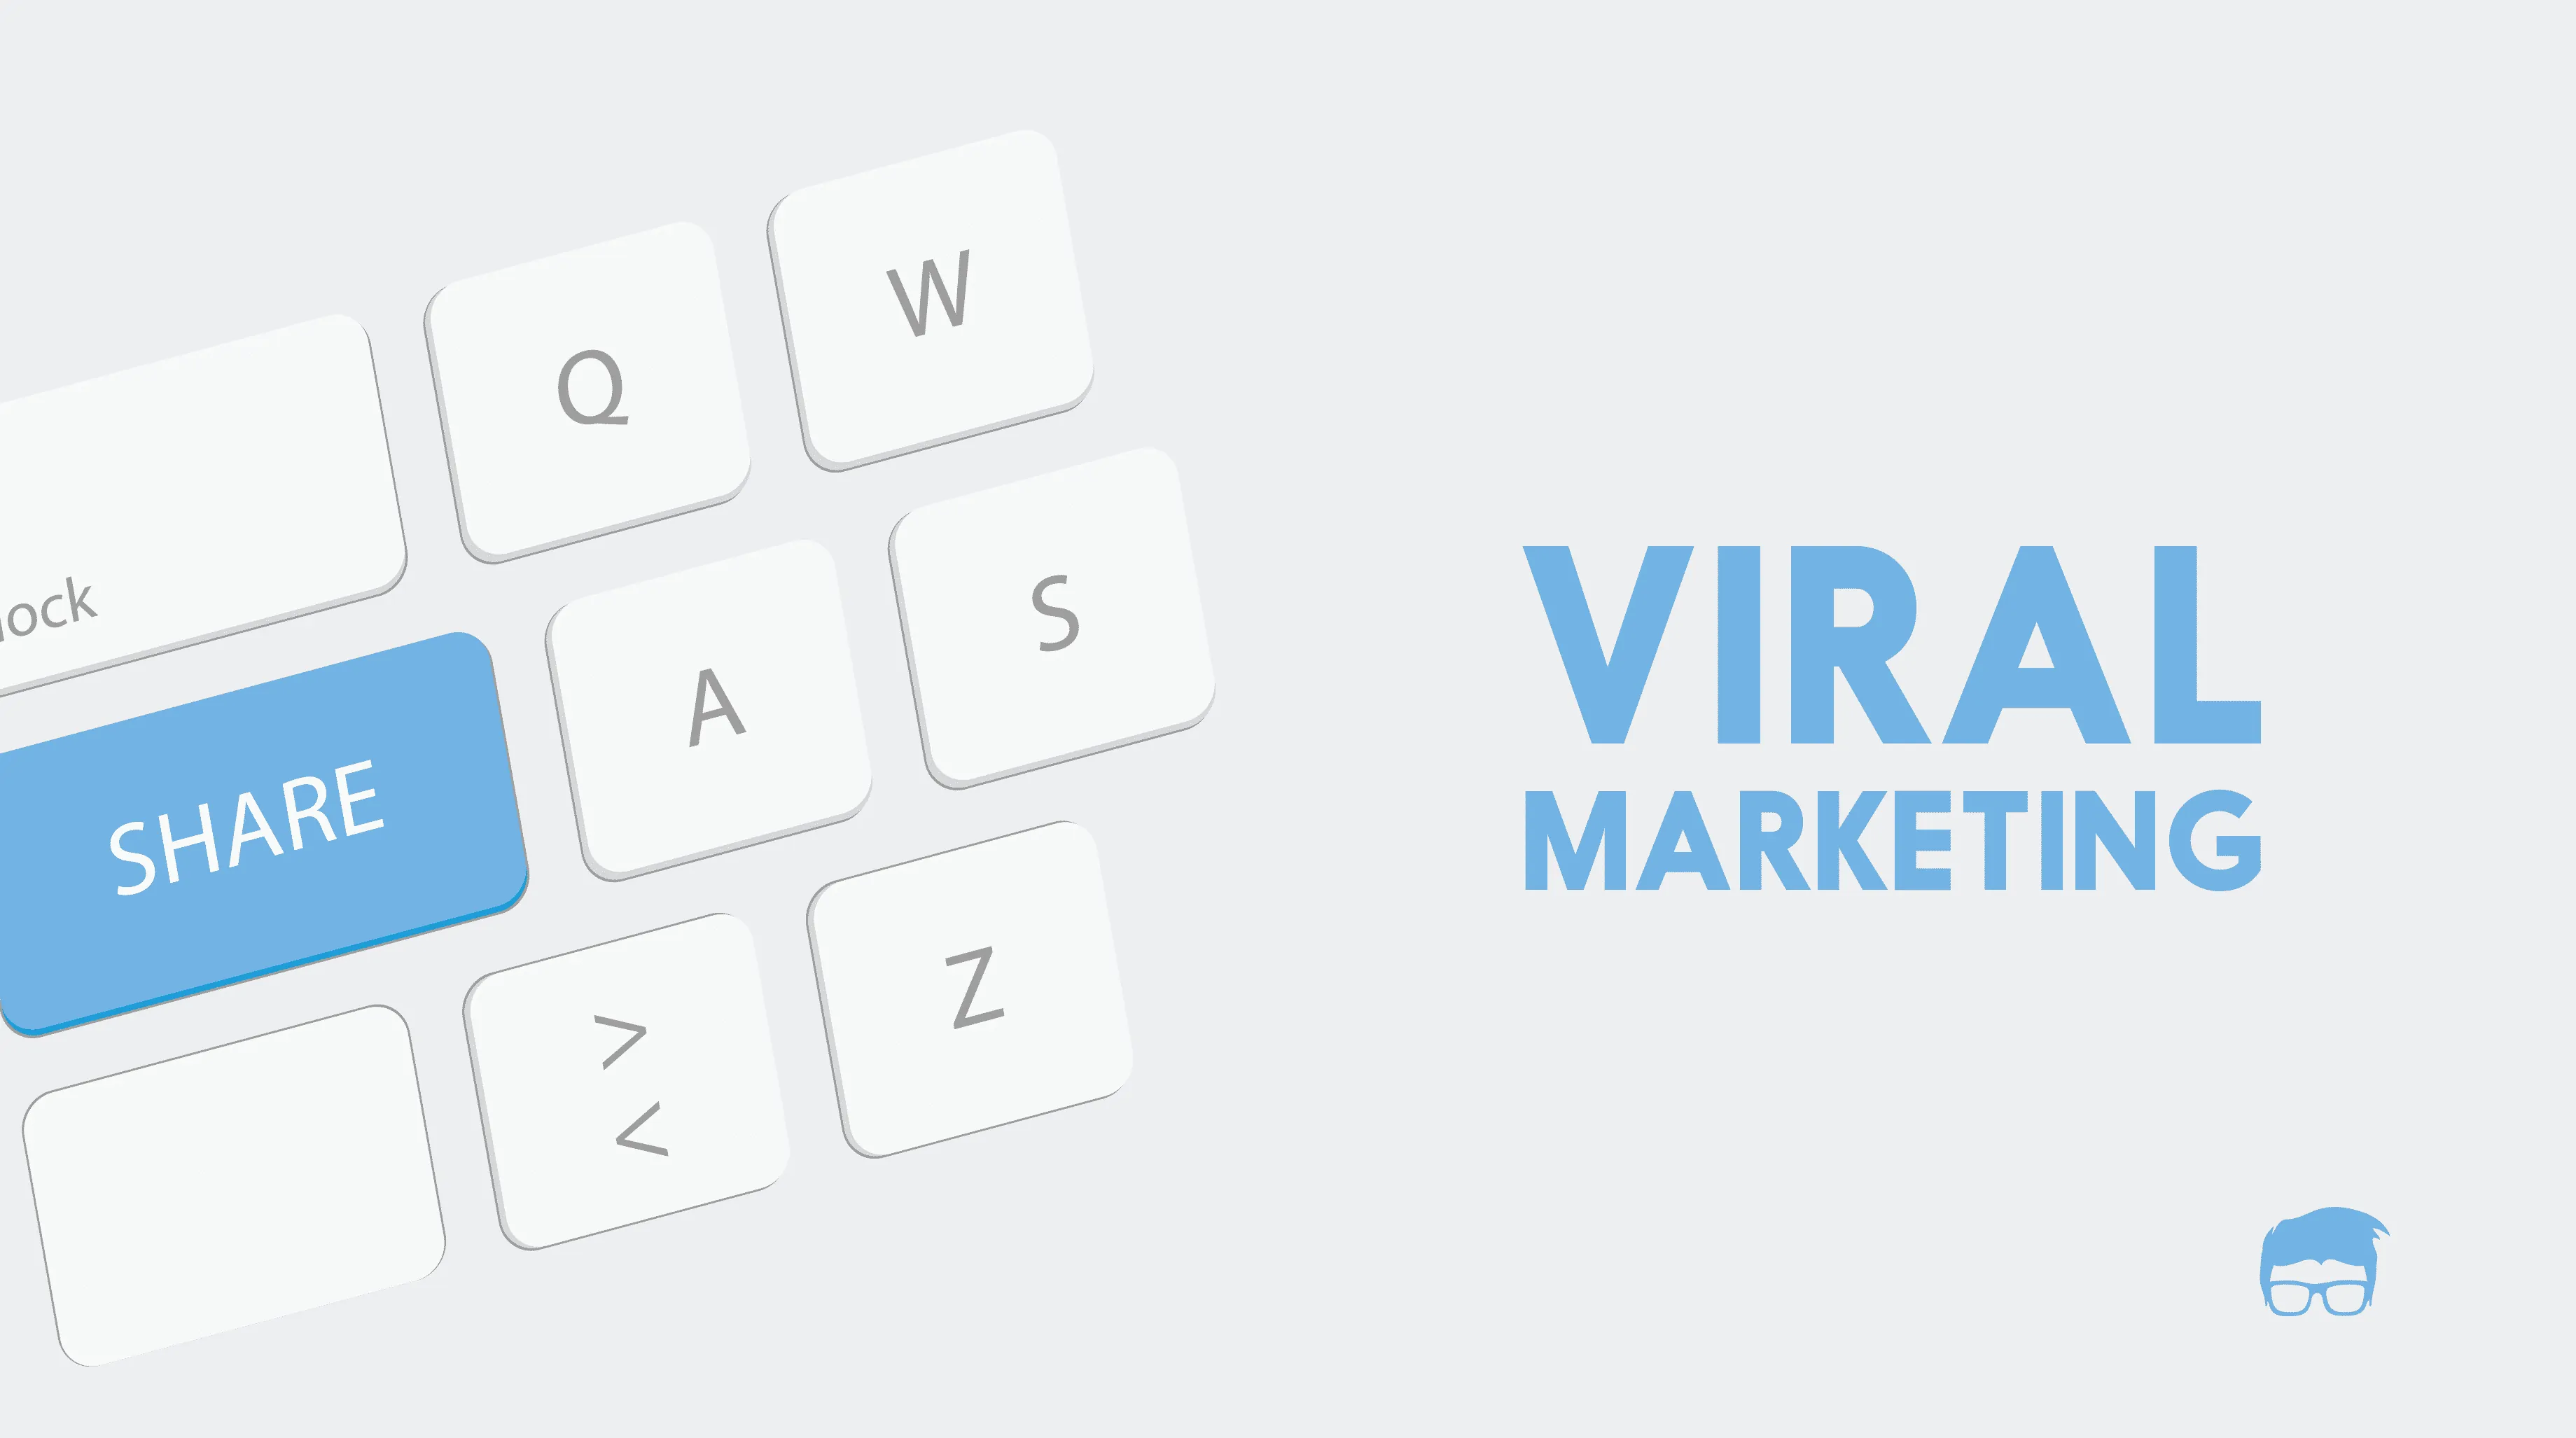 What Exactly Is Viral Marketing?